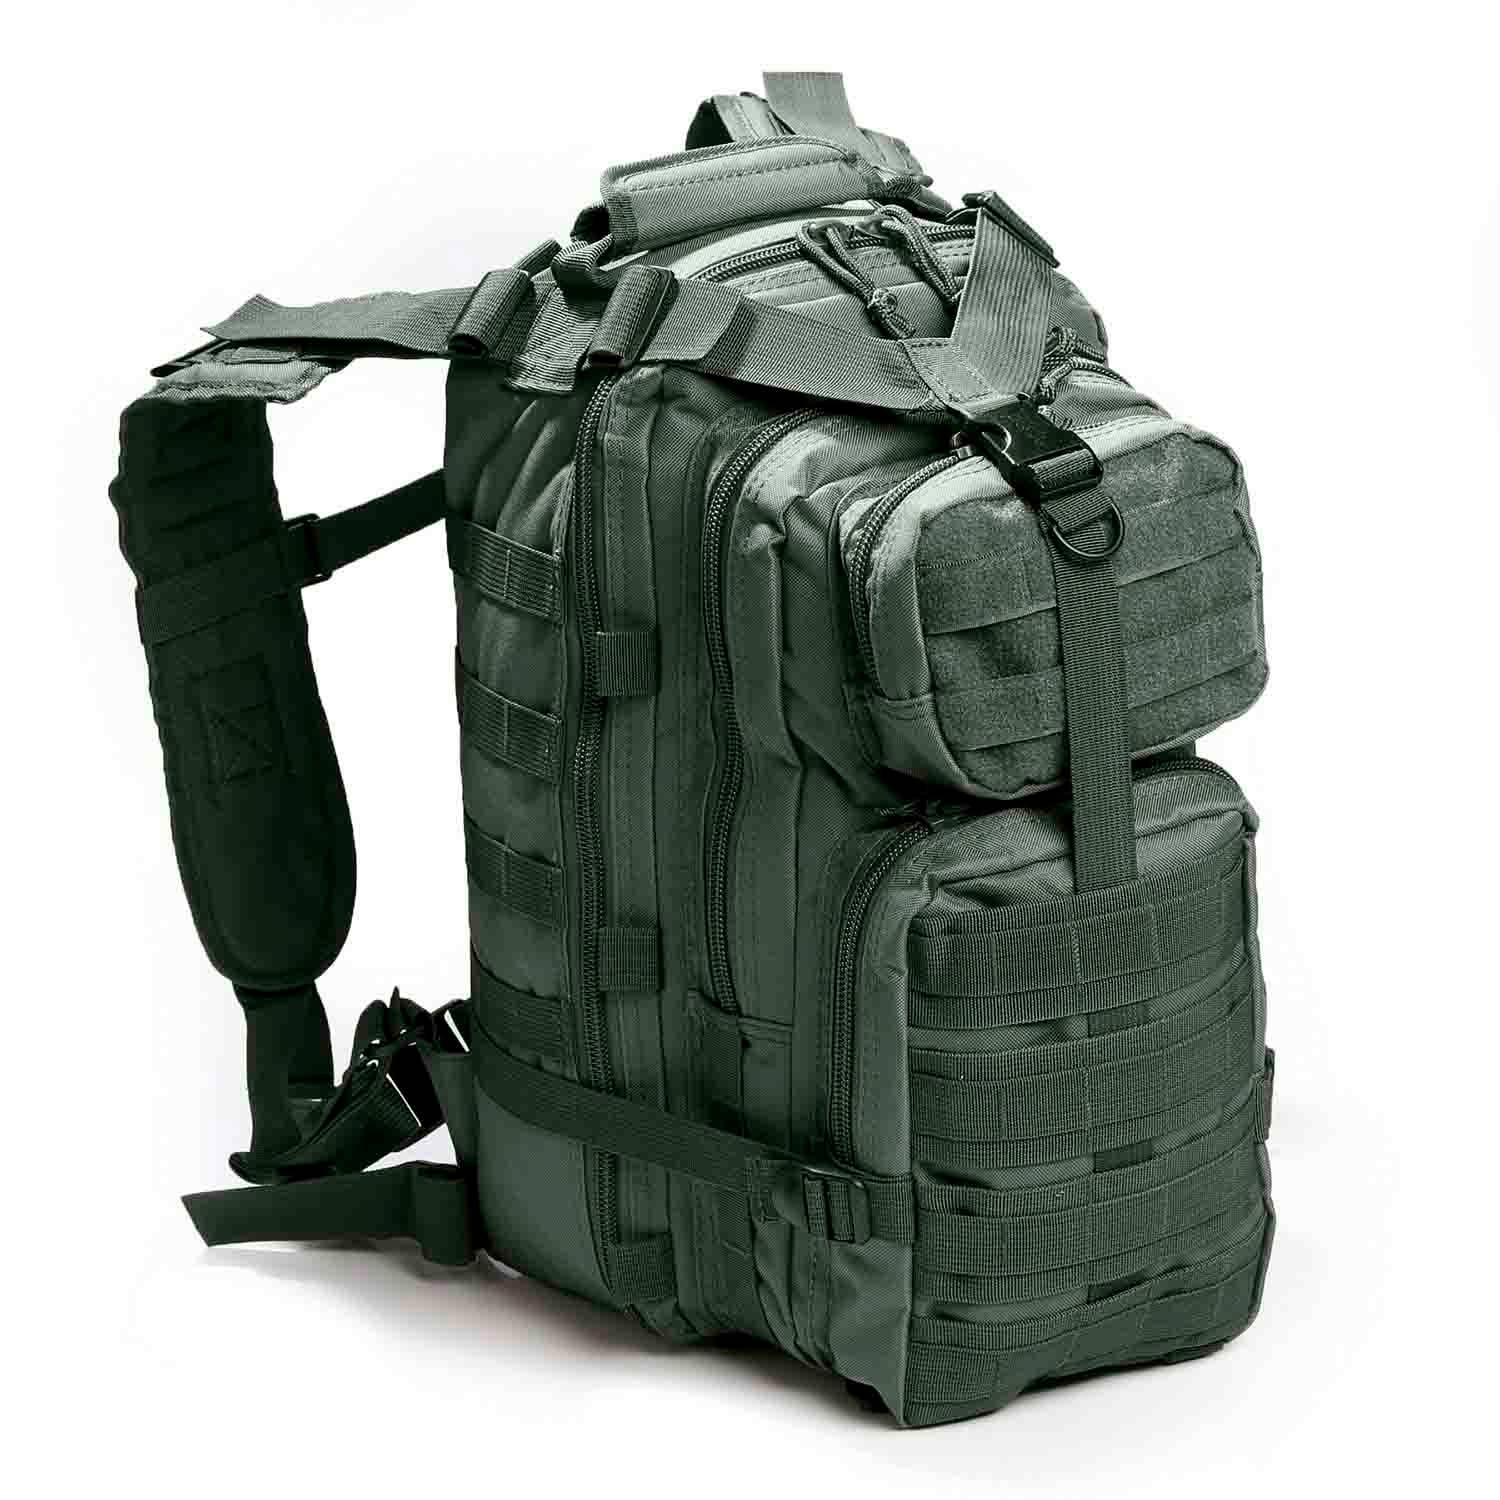 Backpack | MOLLE Galls Tactical Backpack 2-Day